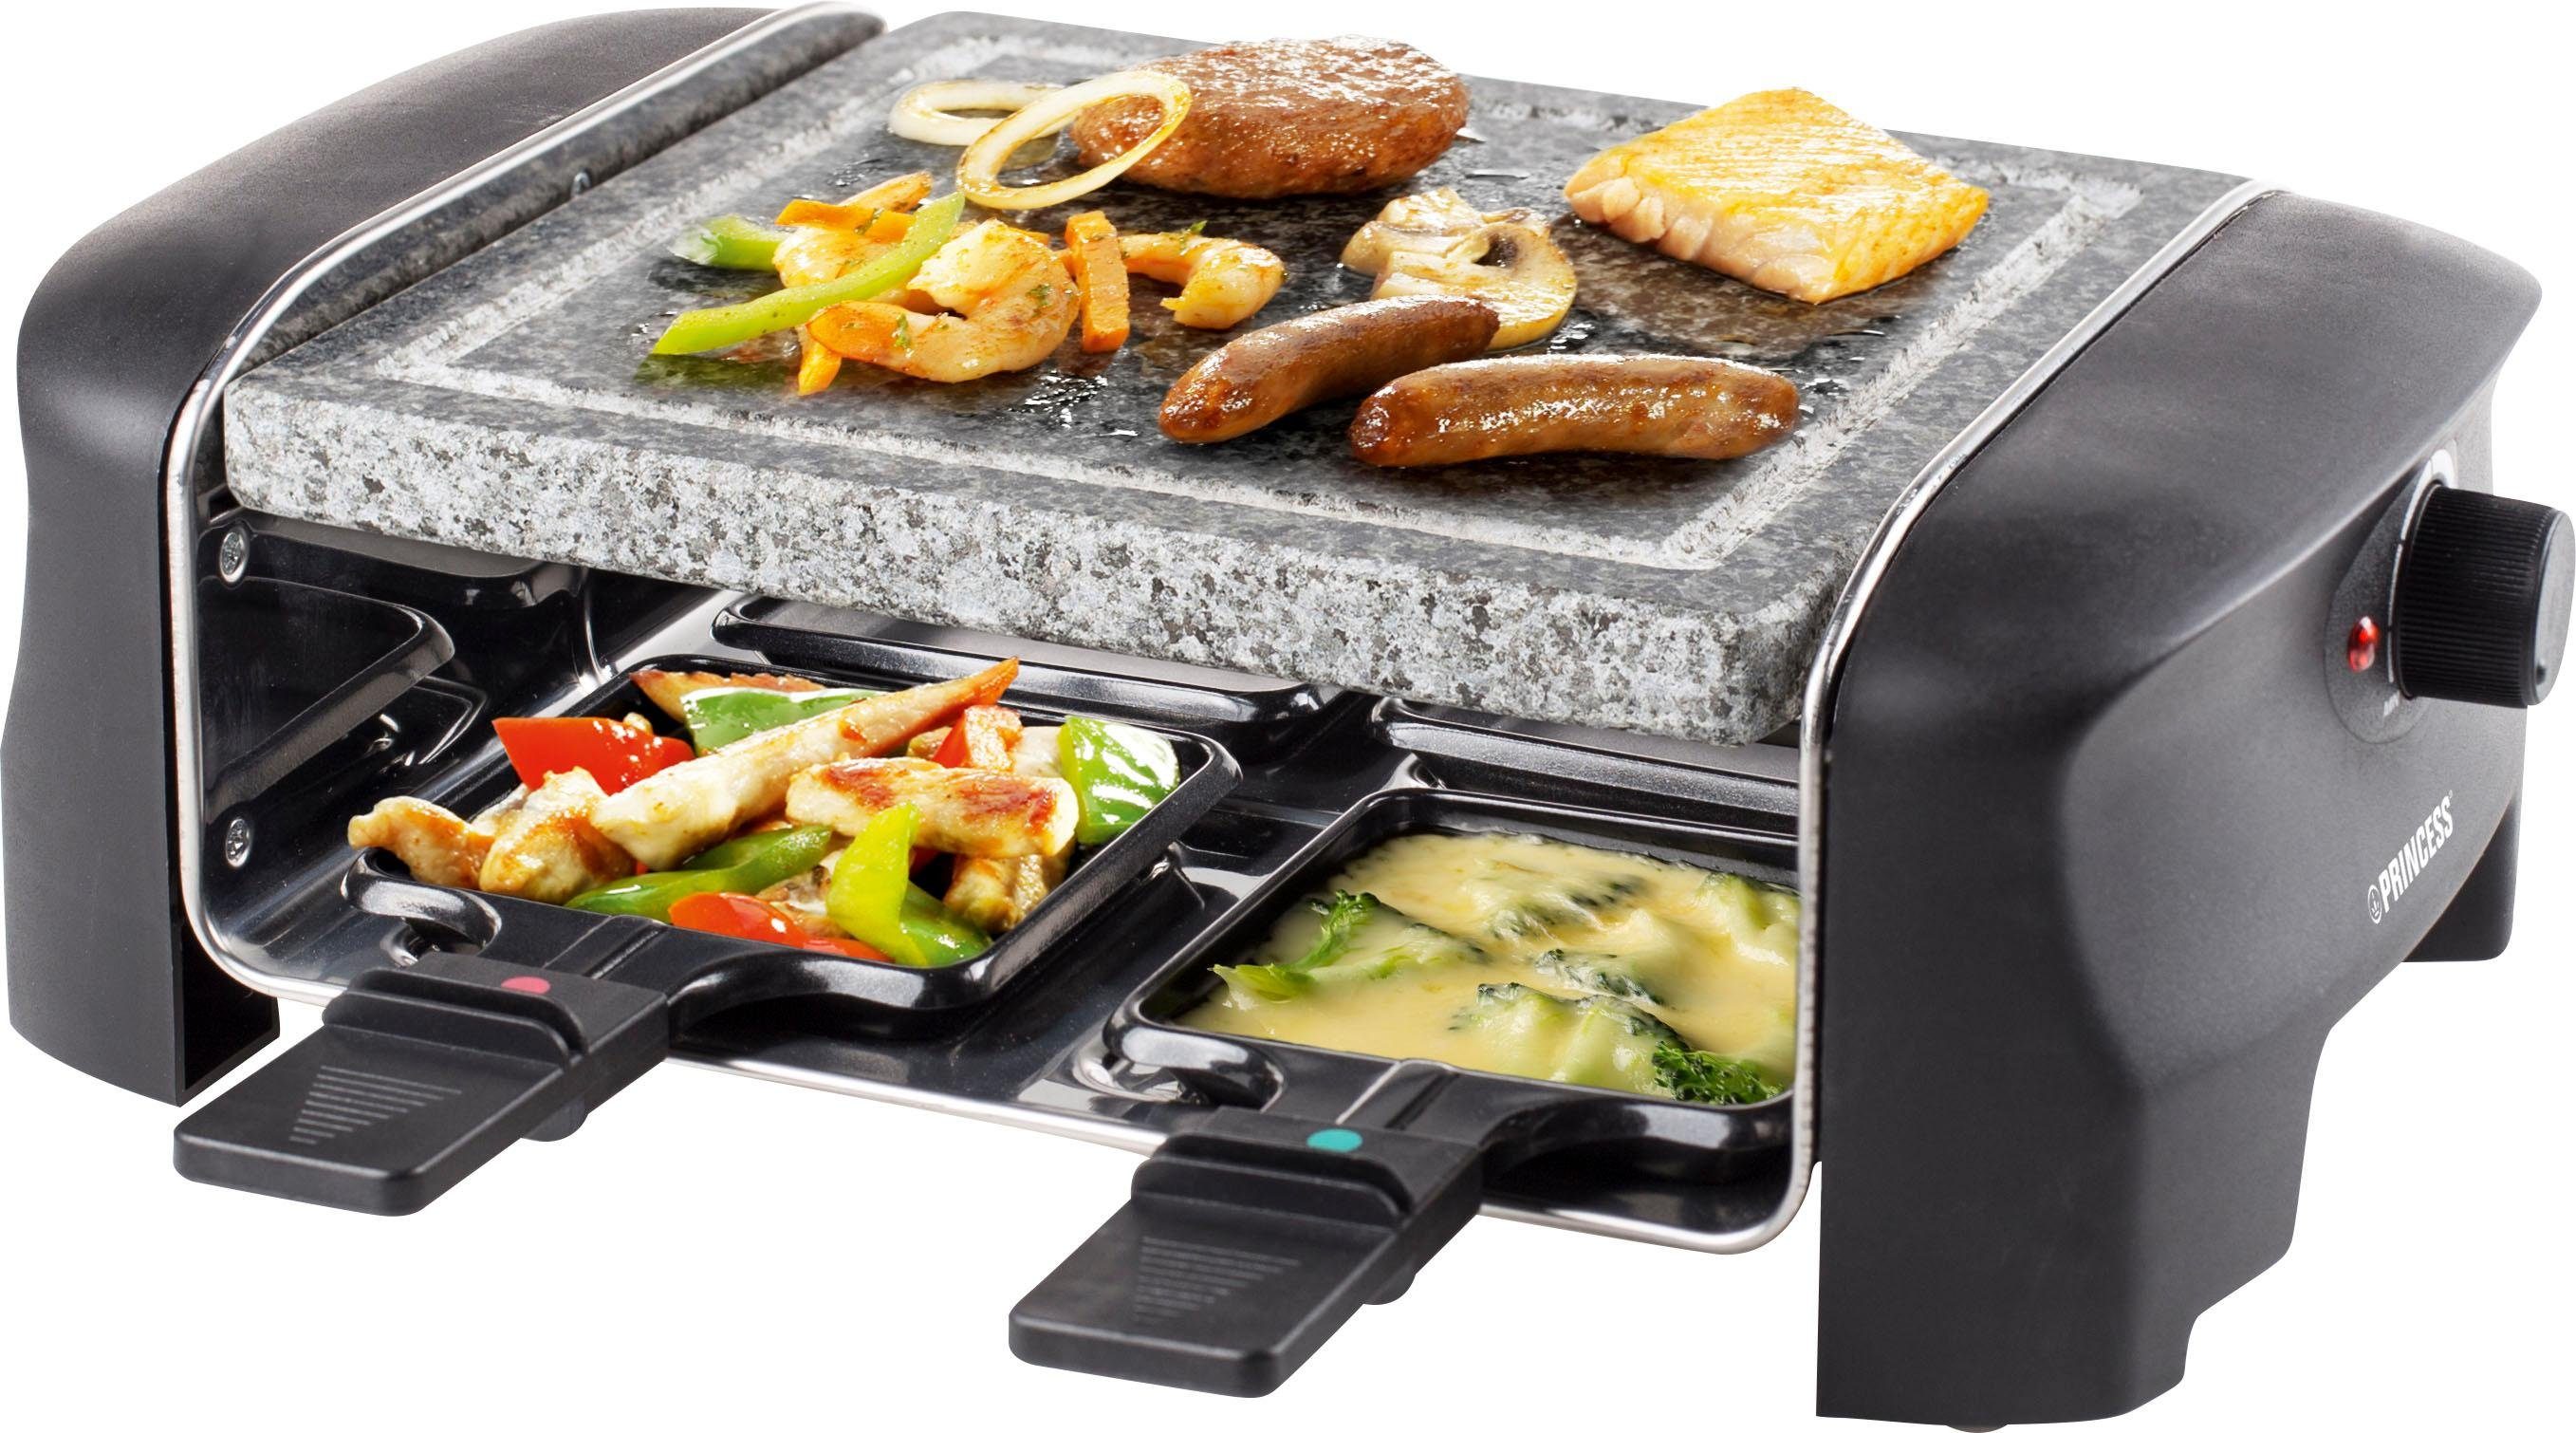 4 Personen mini Raclette mit Stein Grill Steingrill-Platte Camping Grill RA-2990 